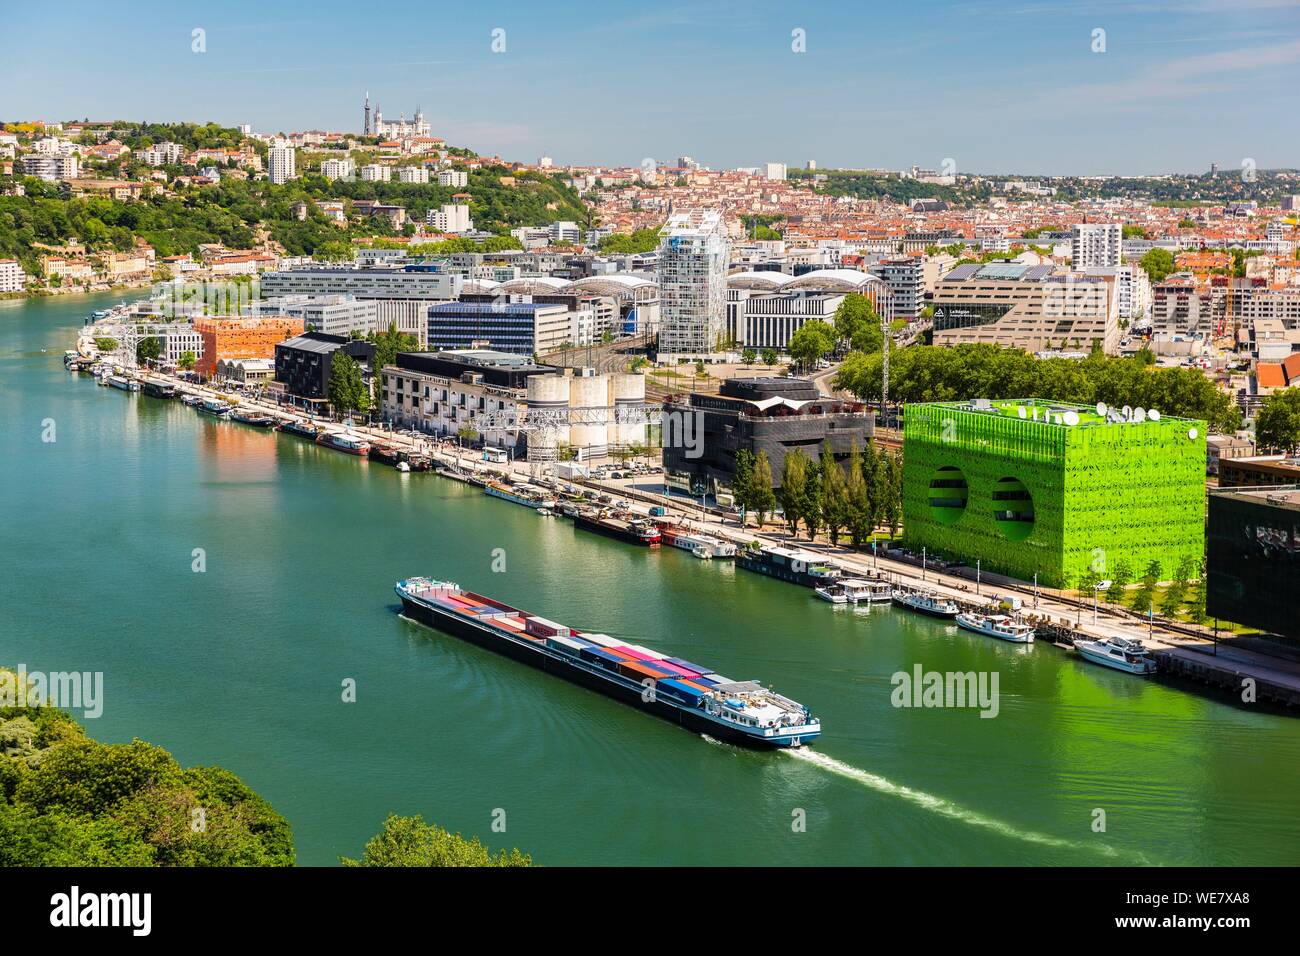 France, Rhône (69), Lyon, district of La Confluence in the south of the peninsula, first French quarter certified sustainable by the WWF, view of the quai Rambaud along the old docks with the Green Cube and Orange Cube and Notre Dame de Fourviere Basilica Stock Photo